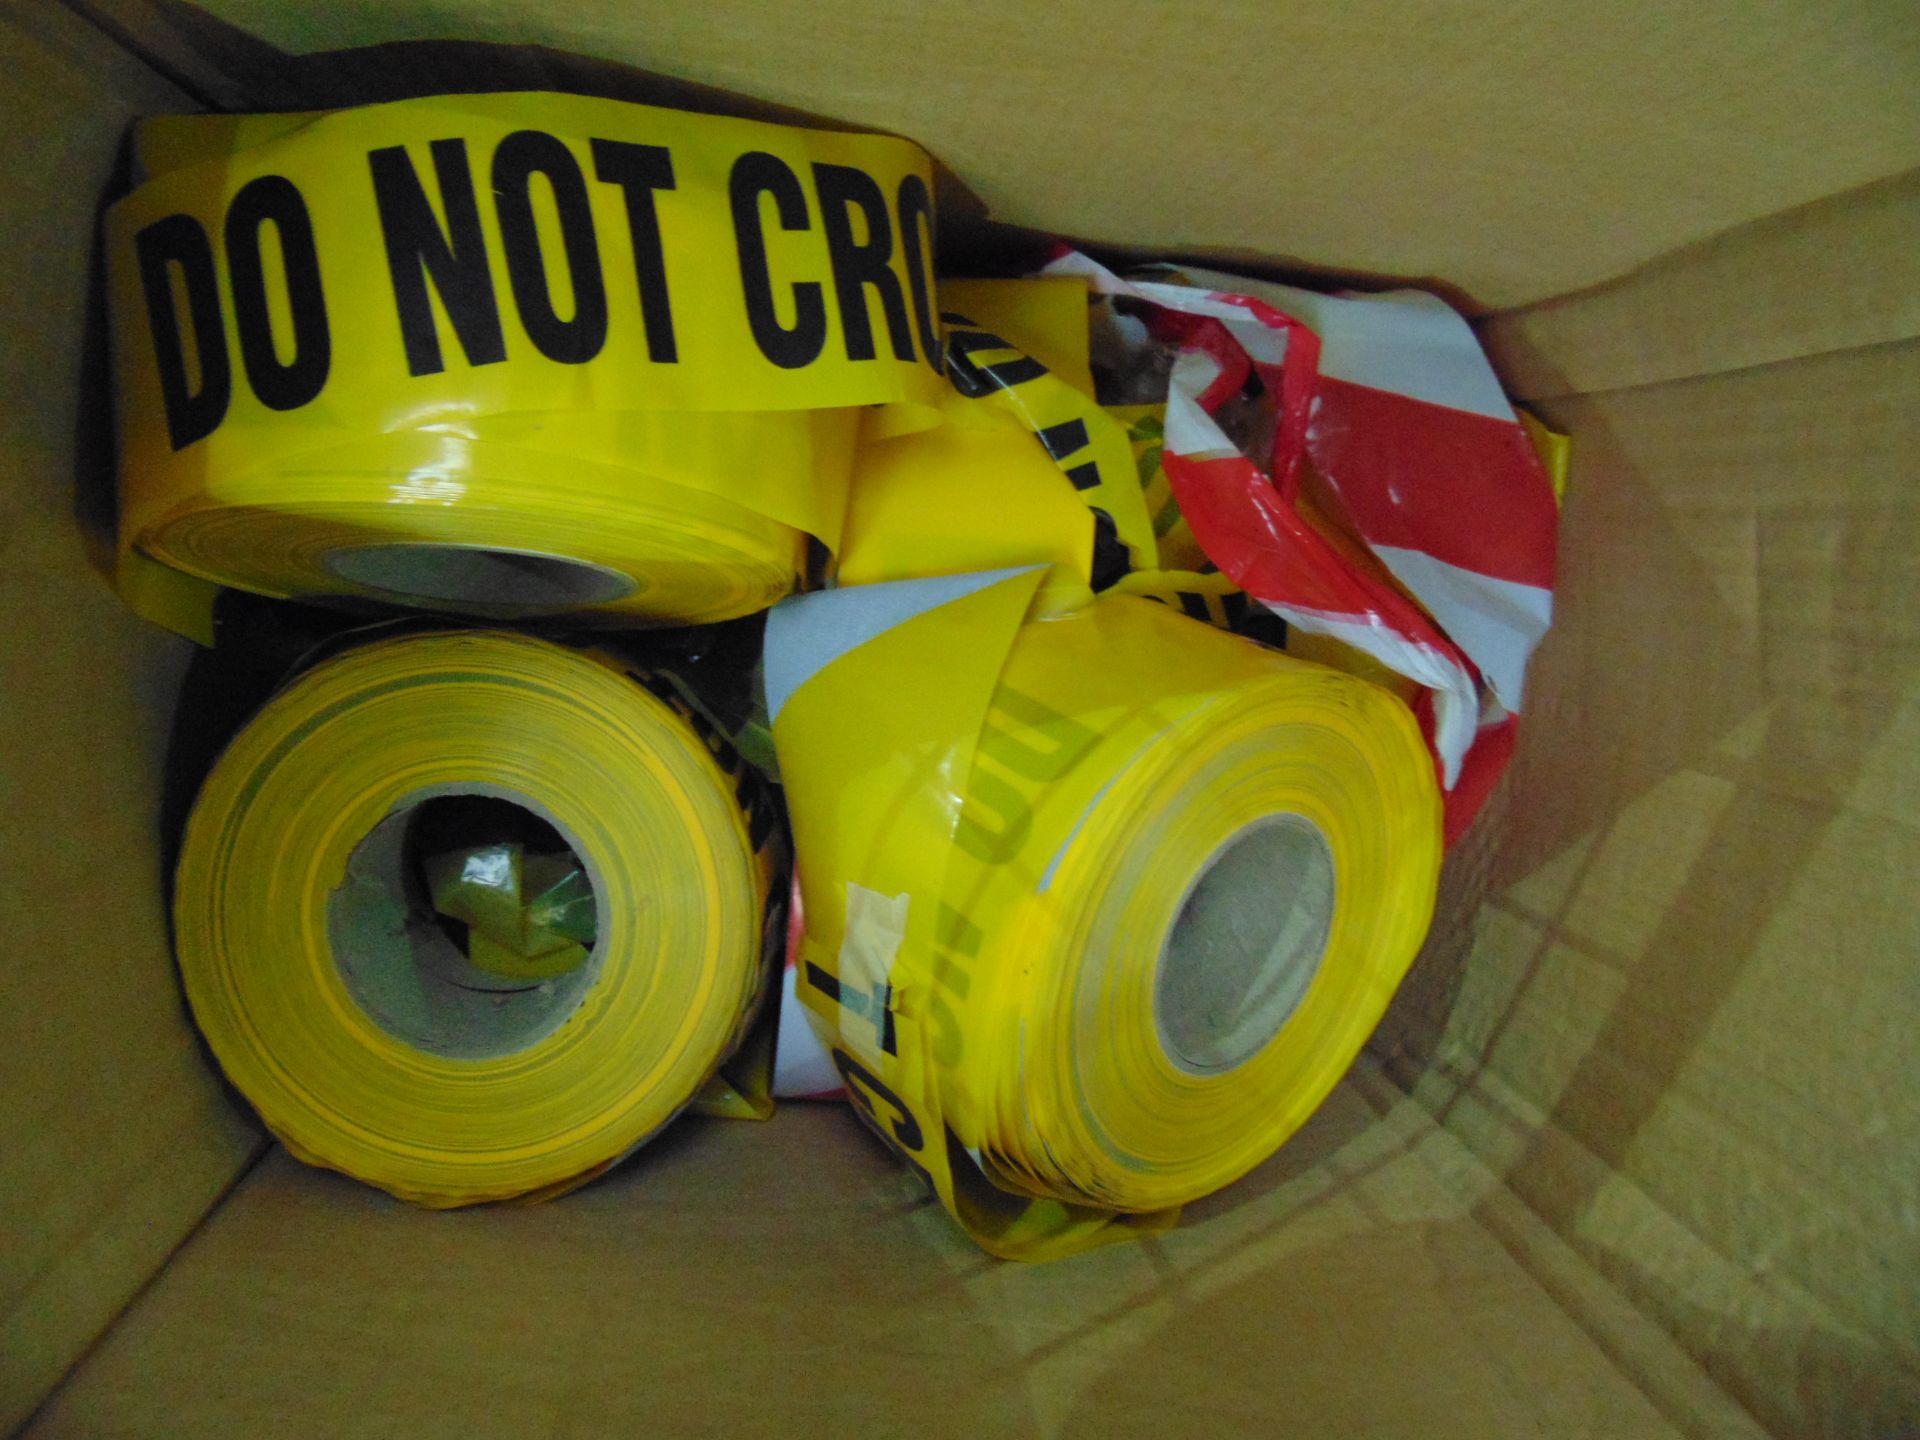 Approx 6 Rolls of Warning Tape